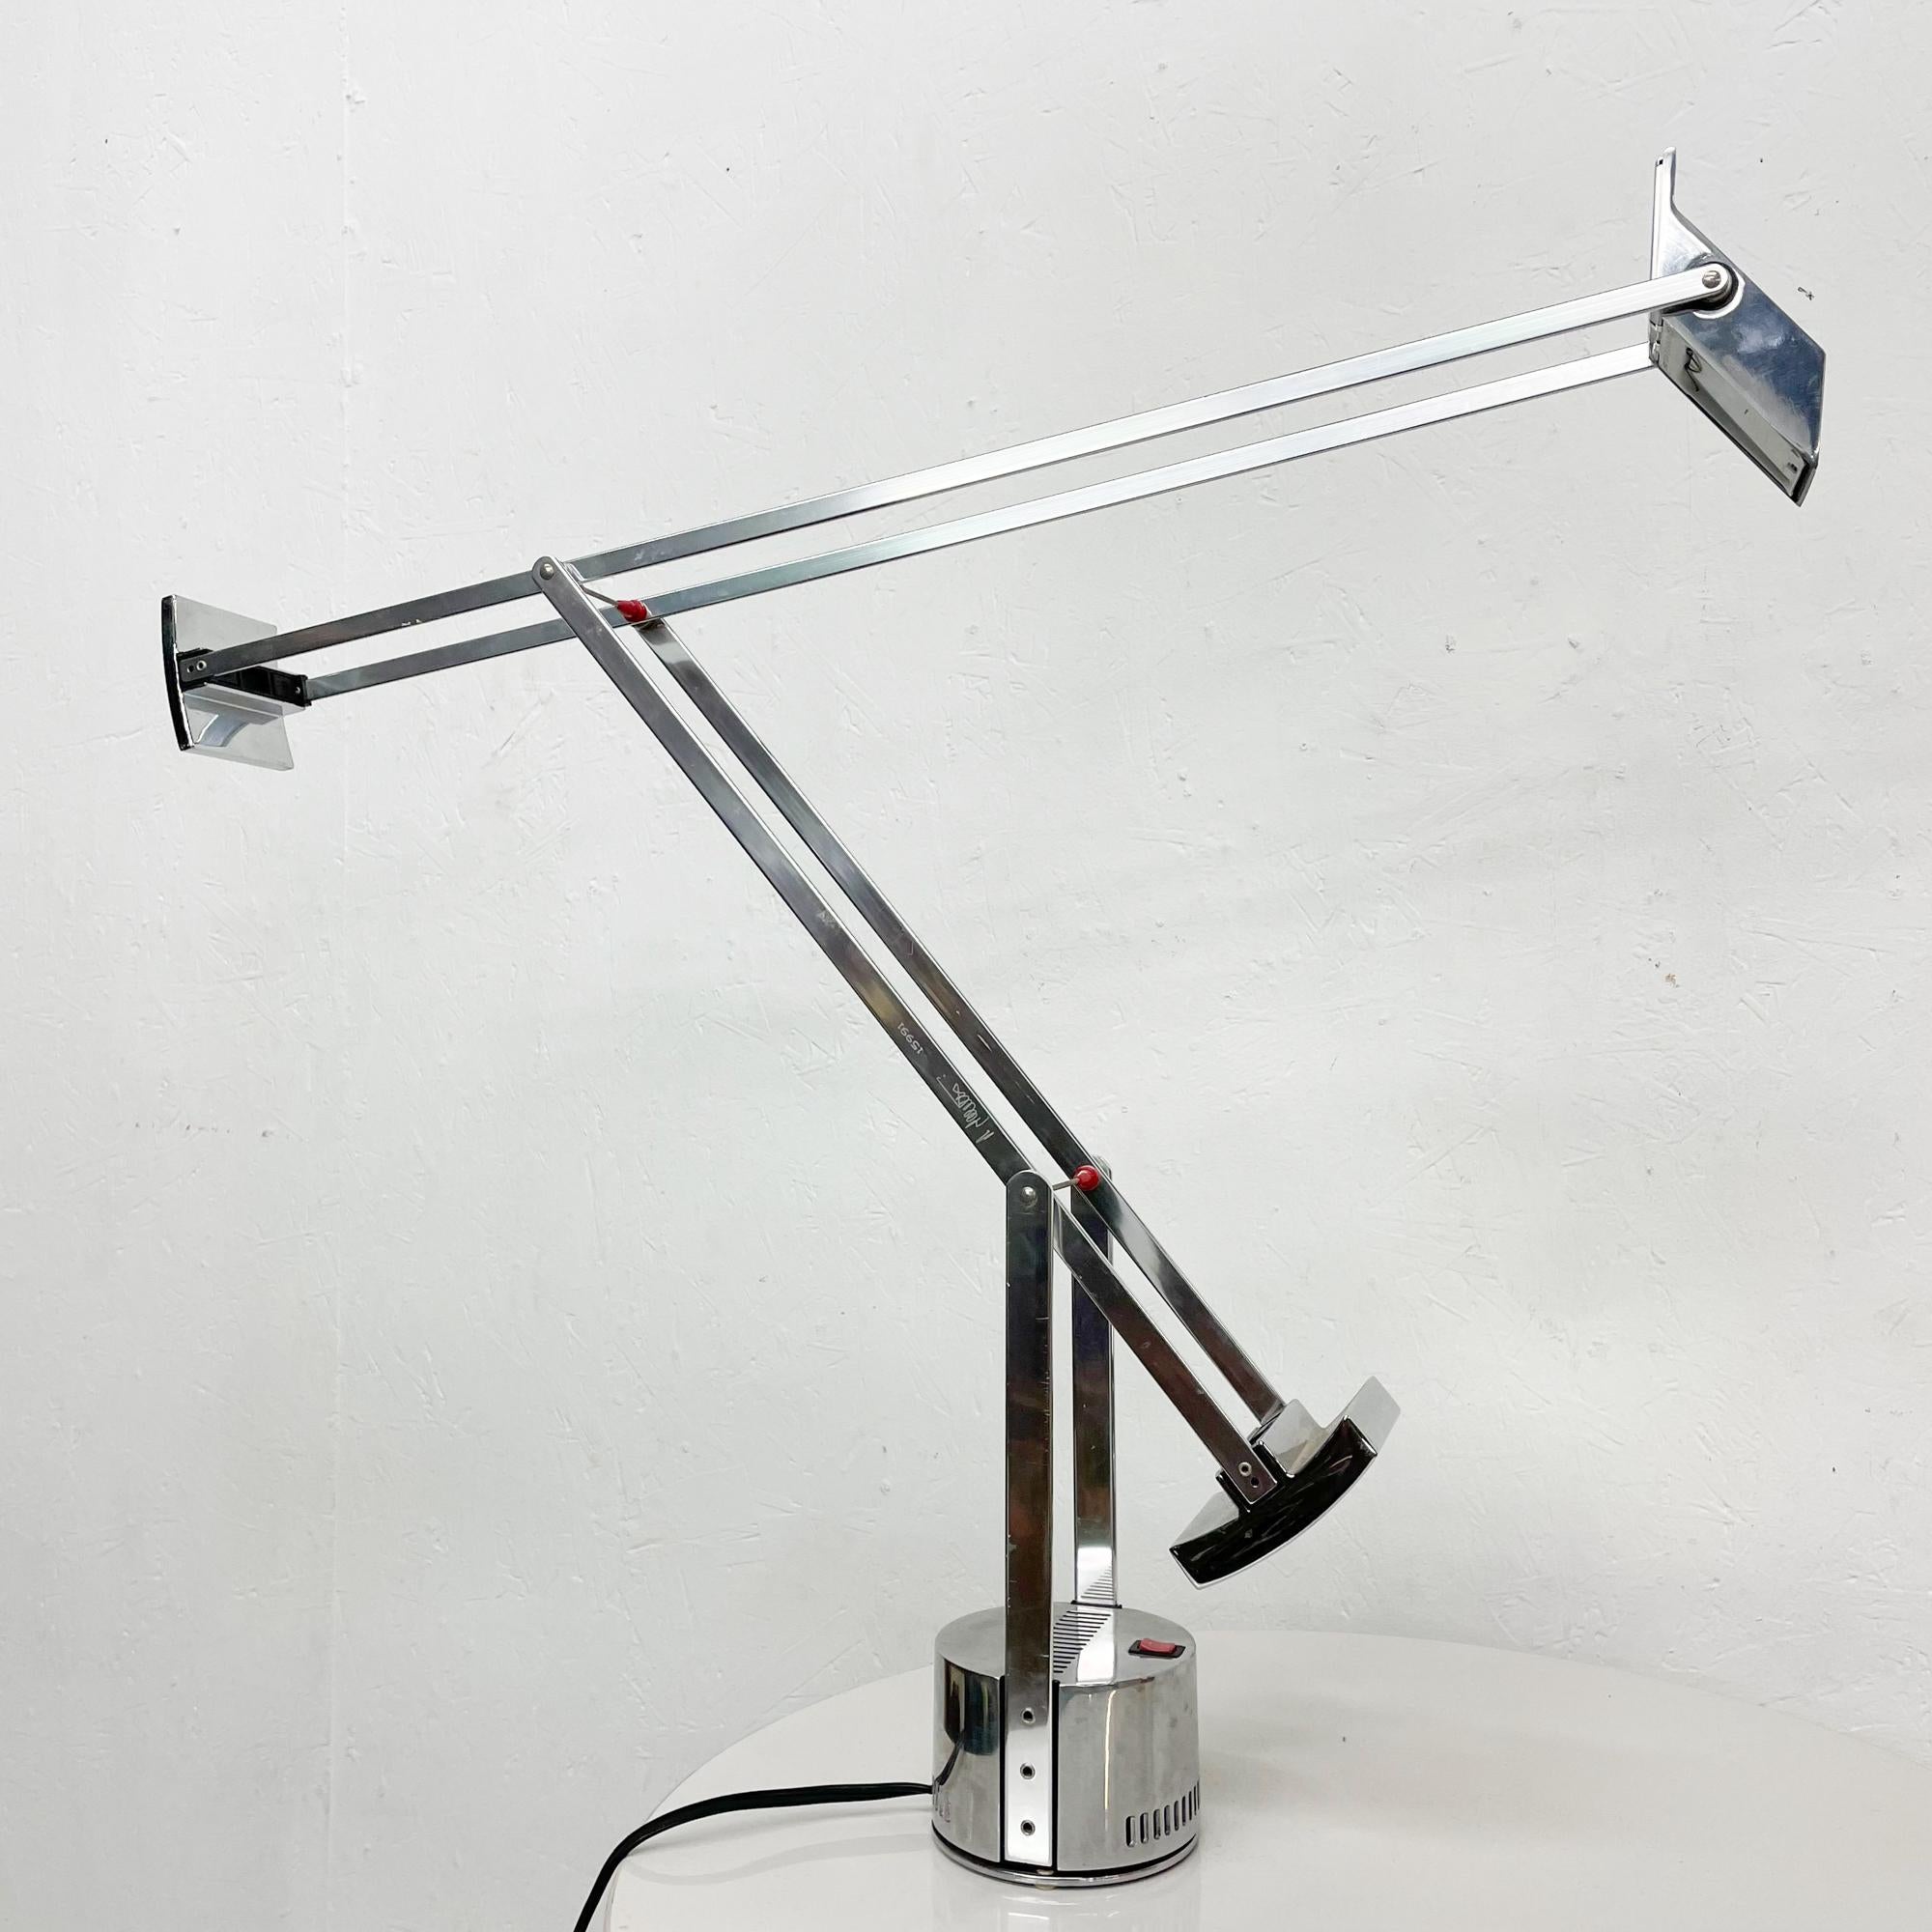 Table Lamp
Very rare in Chrome plate award winning Tizio model table lamp made in Italy 1980s. 
Designed in 1972 by Richard Sapper for Artemide.
Provides form and function. Lamp is lightweight and adjustable offering direct and concentrated